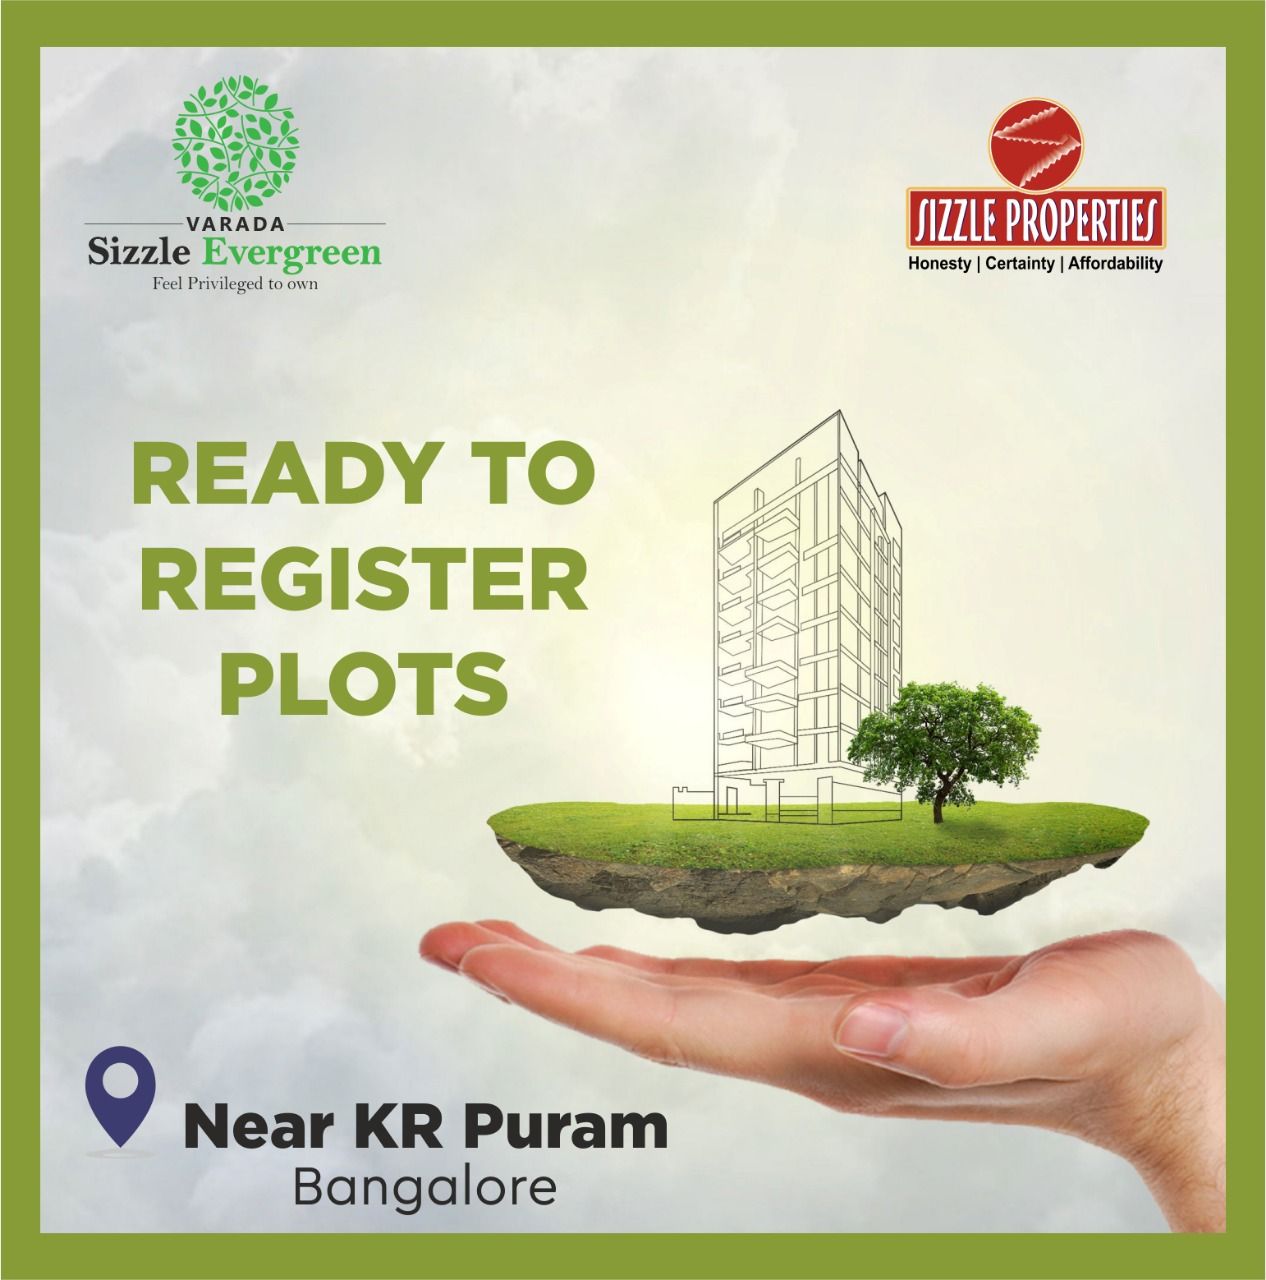 Premium villa plots for sale near KR Puram with bank loans approved